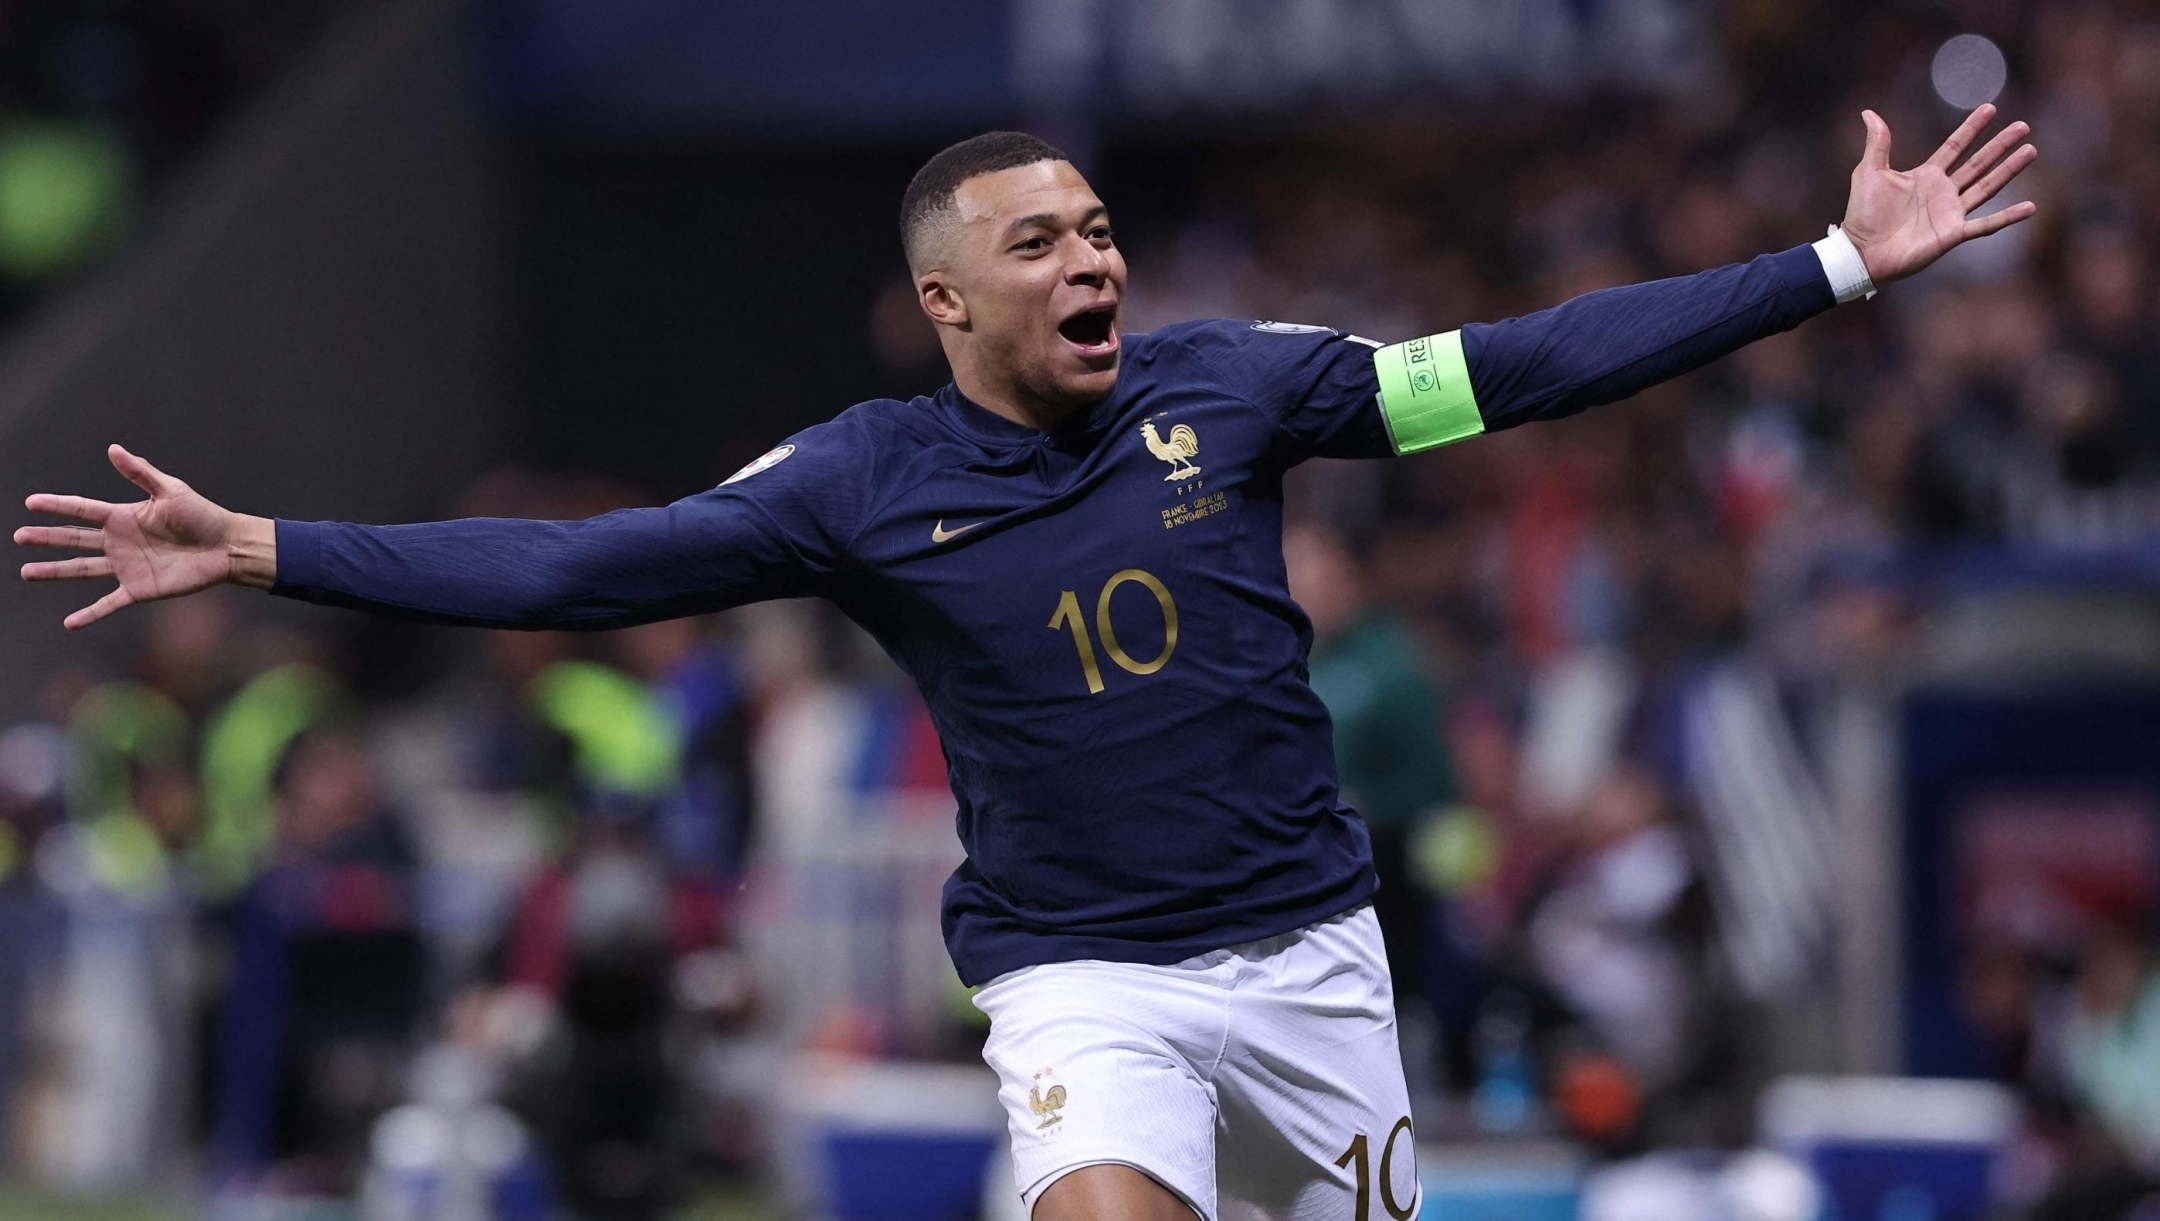 TOPSHOT - France's forward #10 Kylian Mbappe celebrates after scoring a goal during the UEFA EURO 2024 Group B qualifying football match between France and Gibraltar at the Allianz Riviera stadium in Nice, southeastern France, on November 18, 2023. (Photo by FRANCK FIFE / AFP)